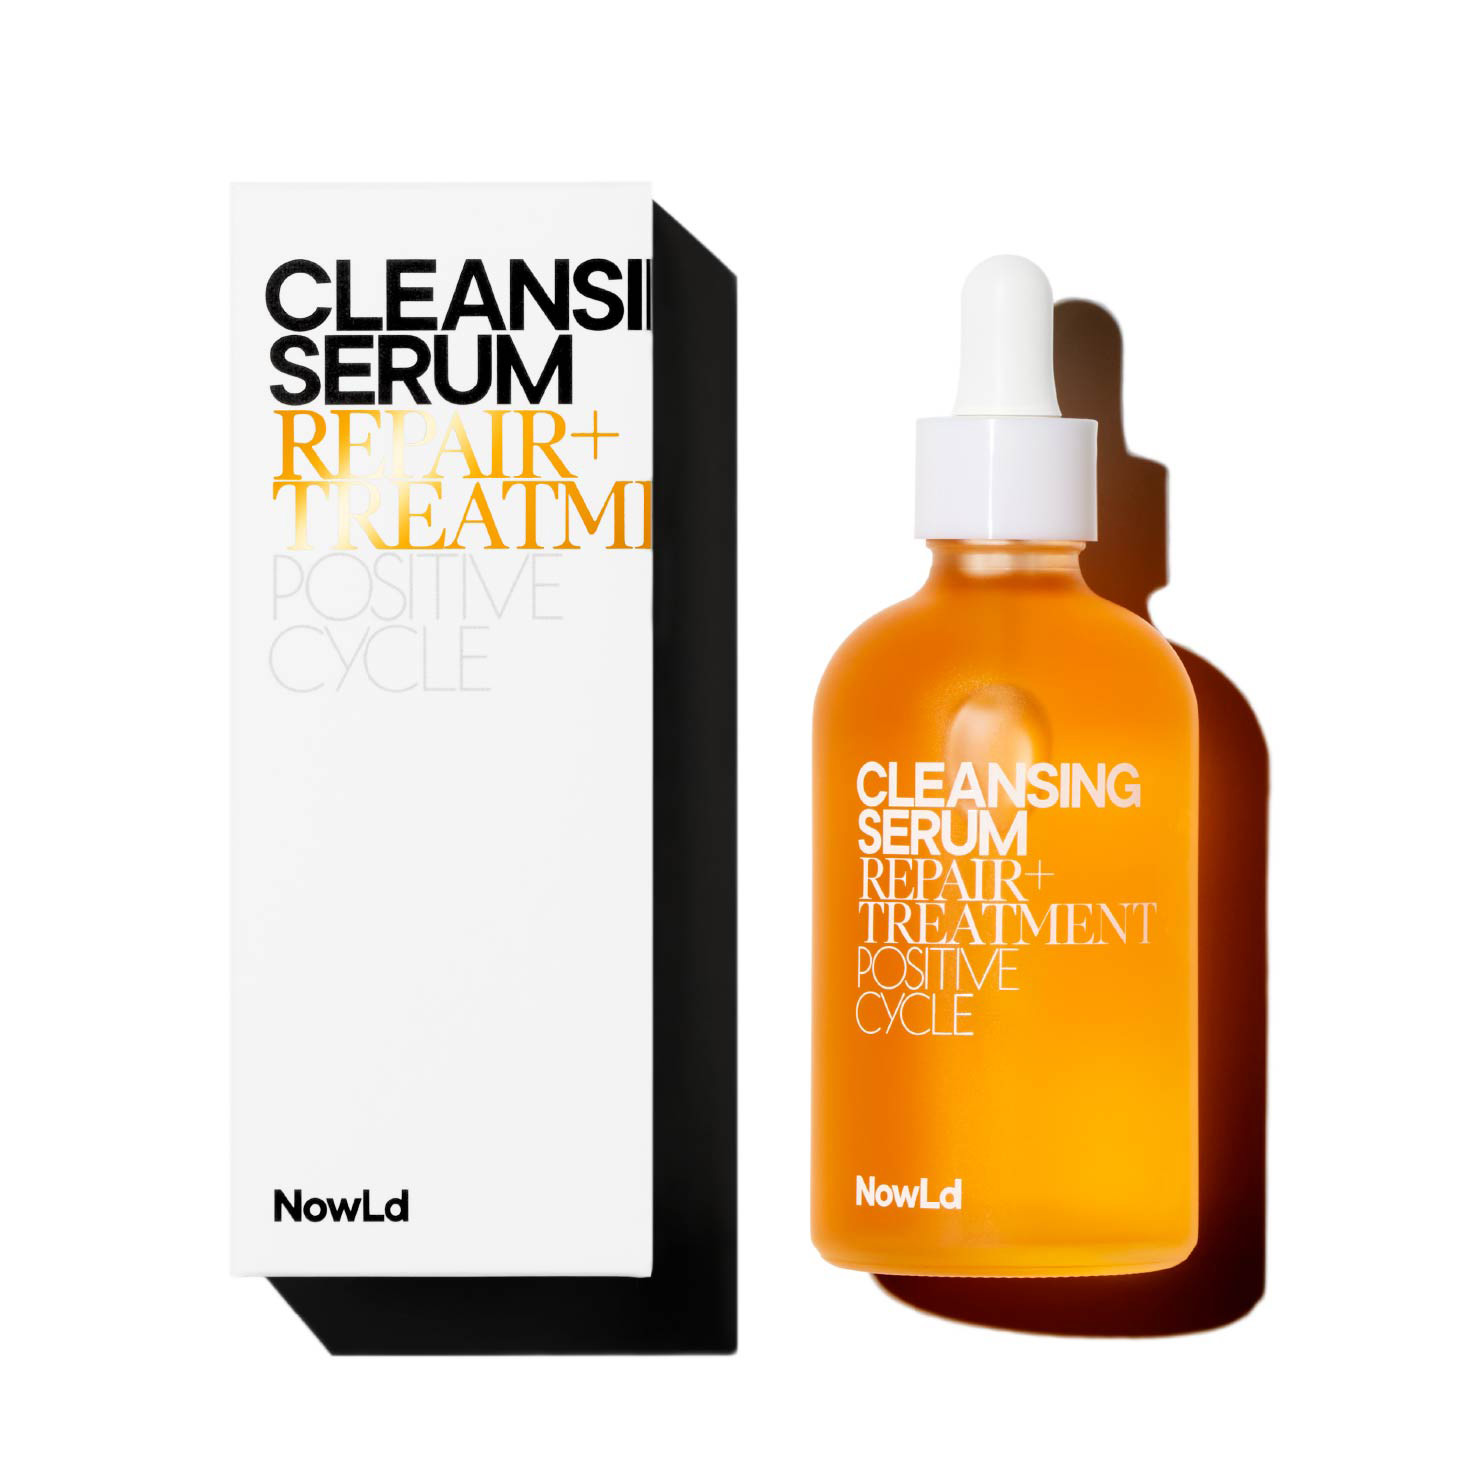 NowLd｜Cleansing Serum｜Product Shot